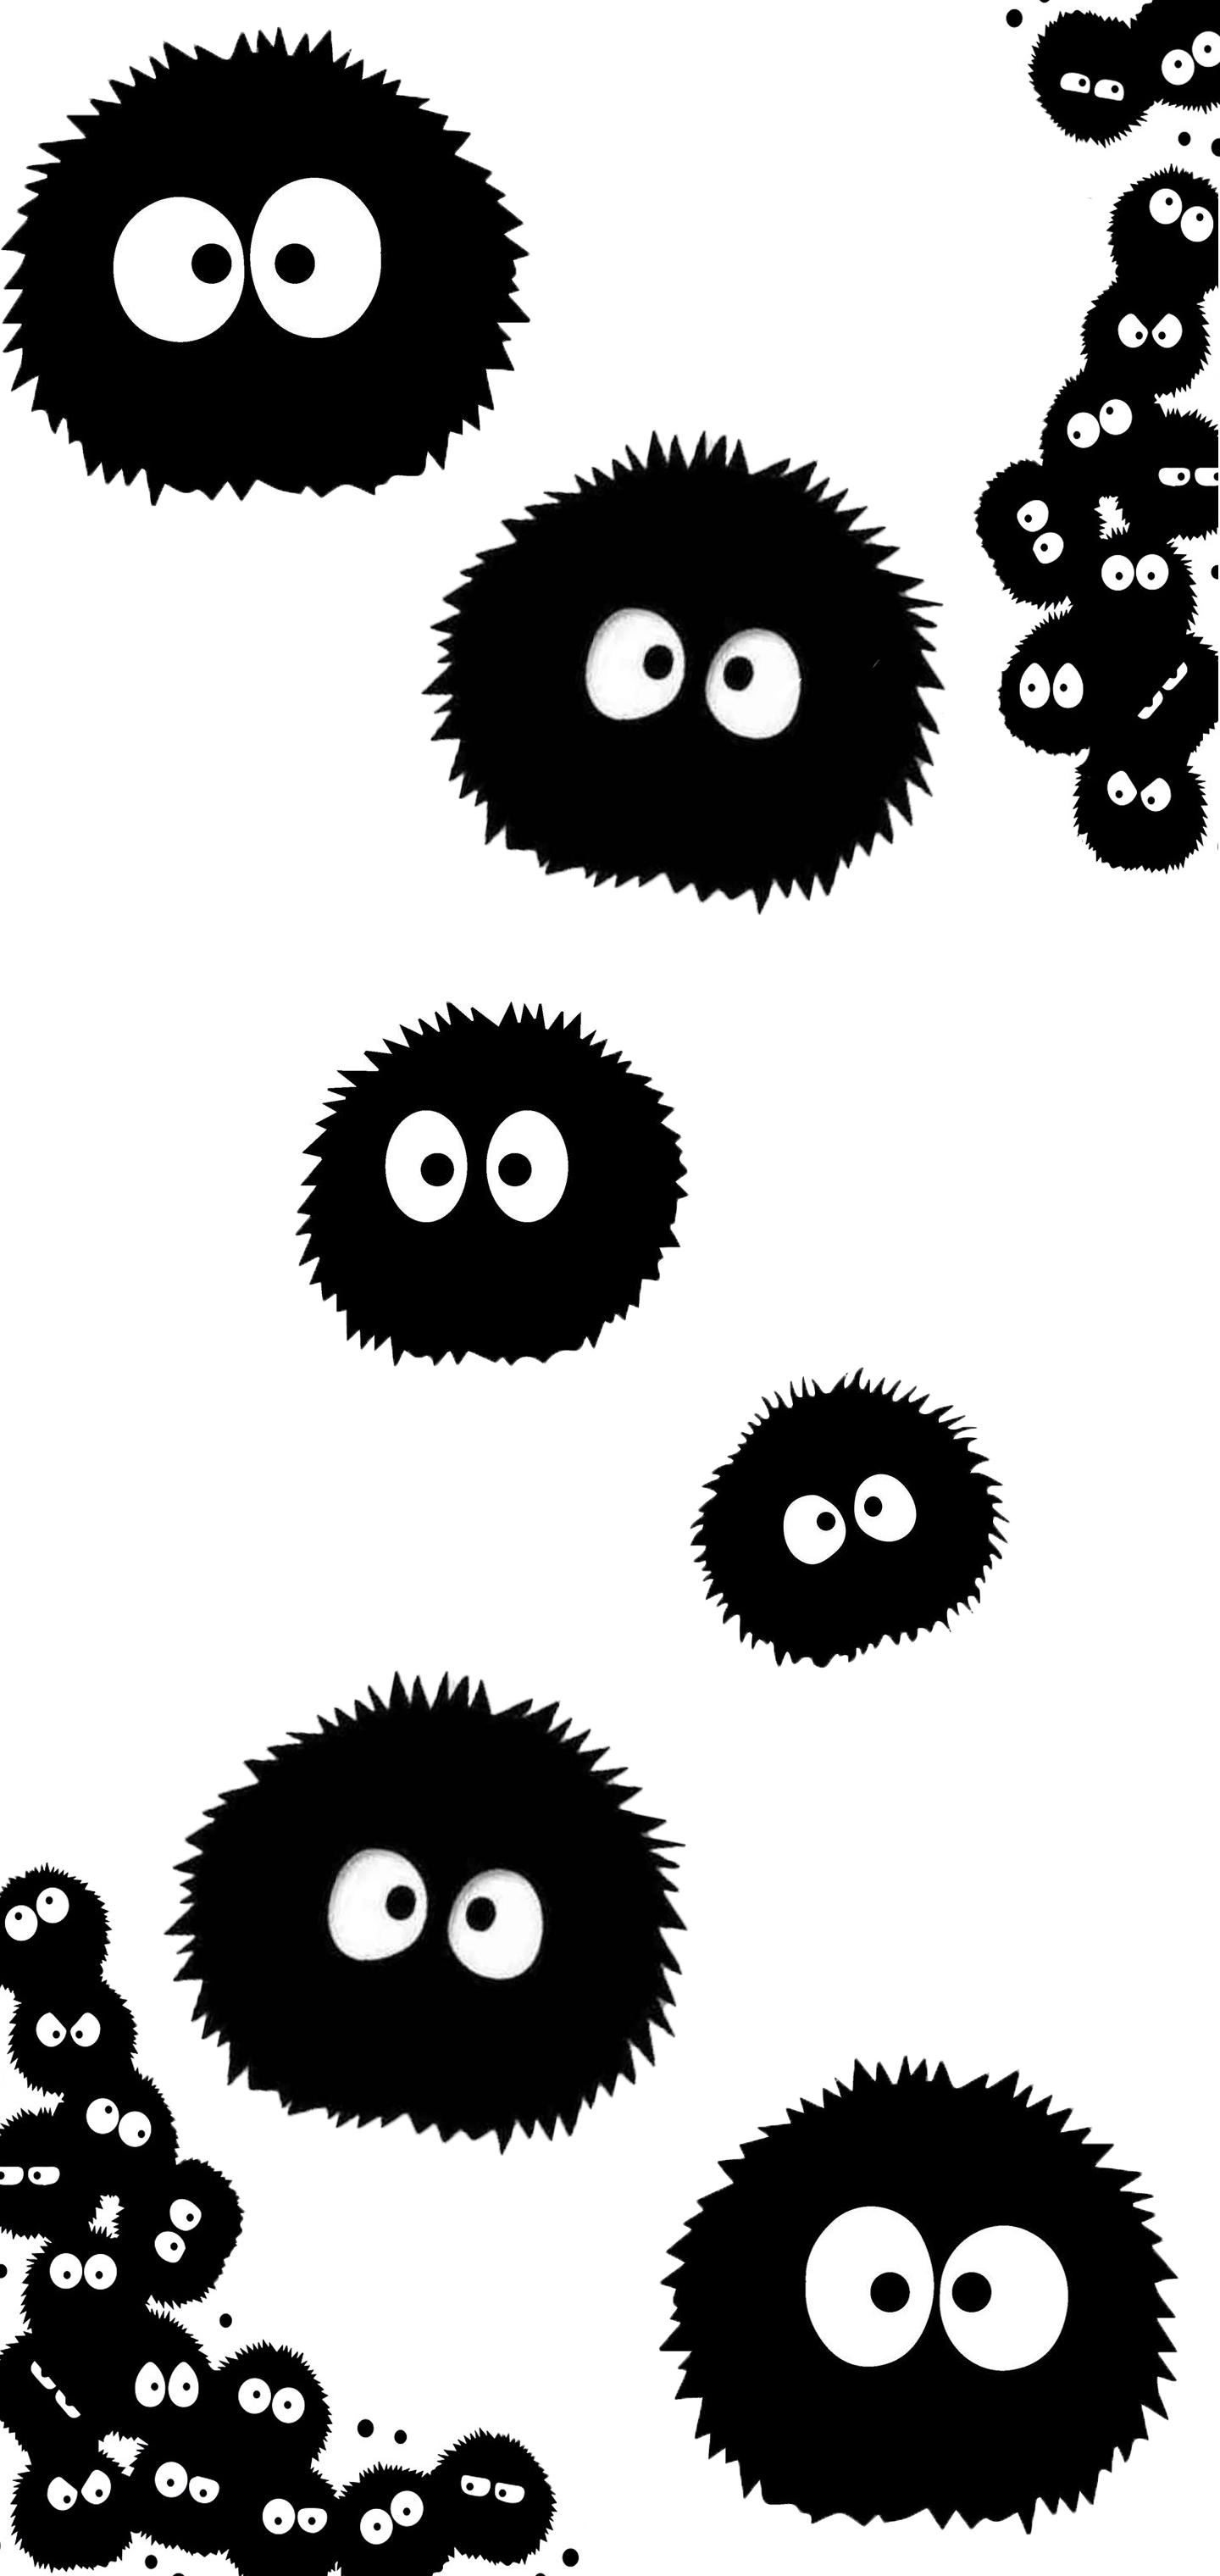 Soot Sprites Of Spirited Away By BoyWhoCrapped Galaxy S10 Hole Punch Wallpaper